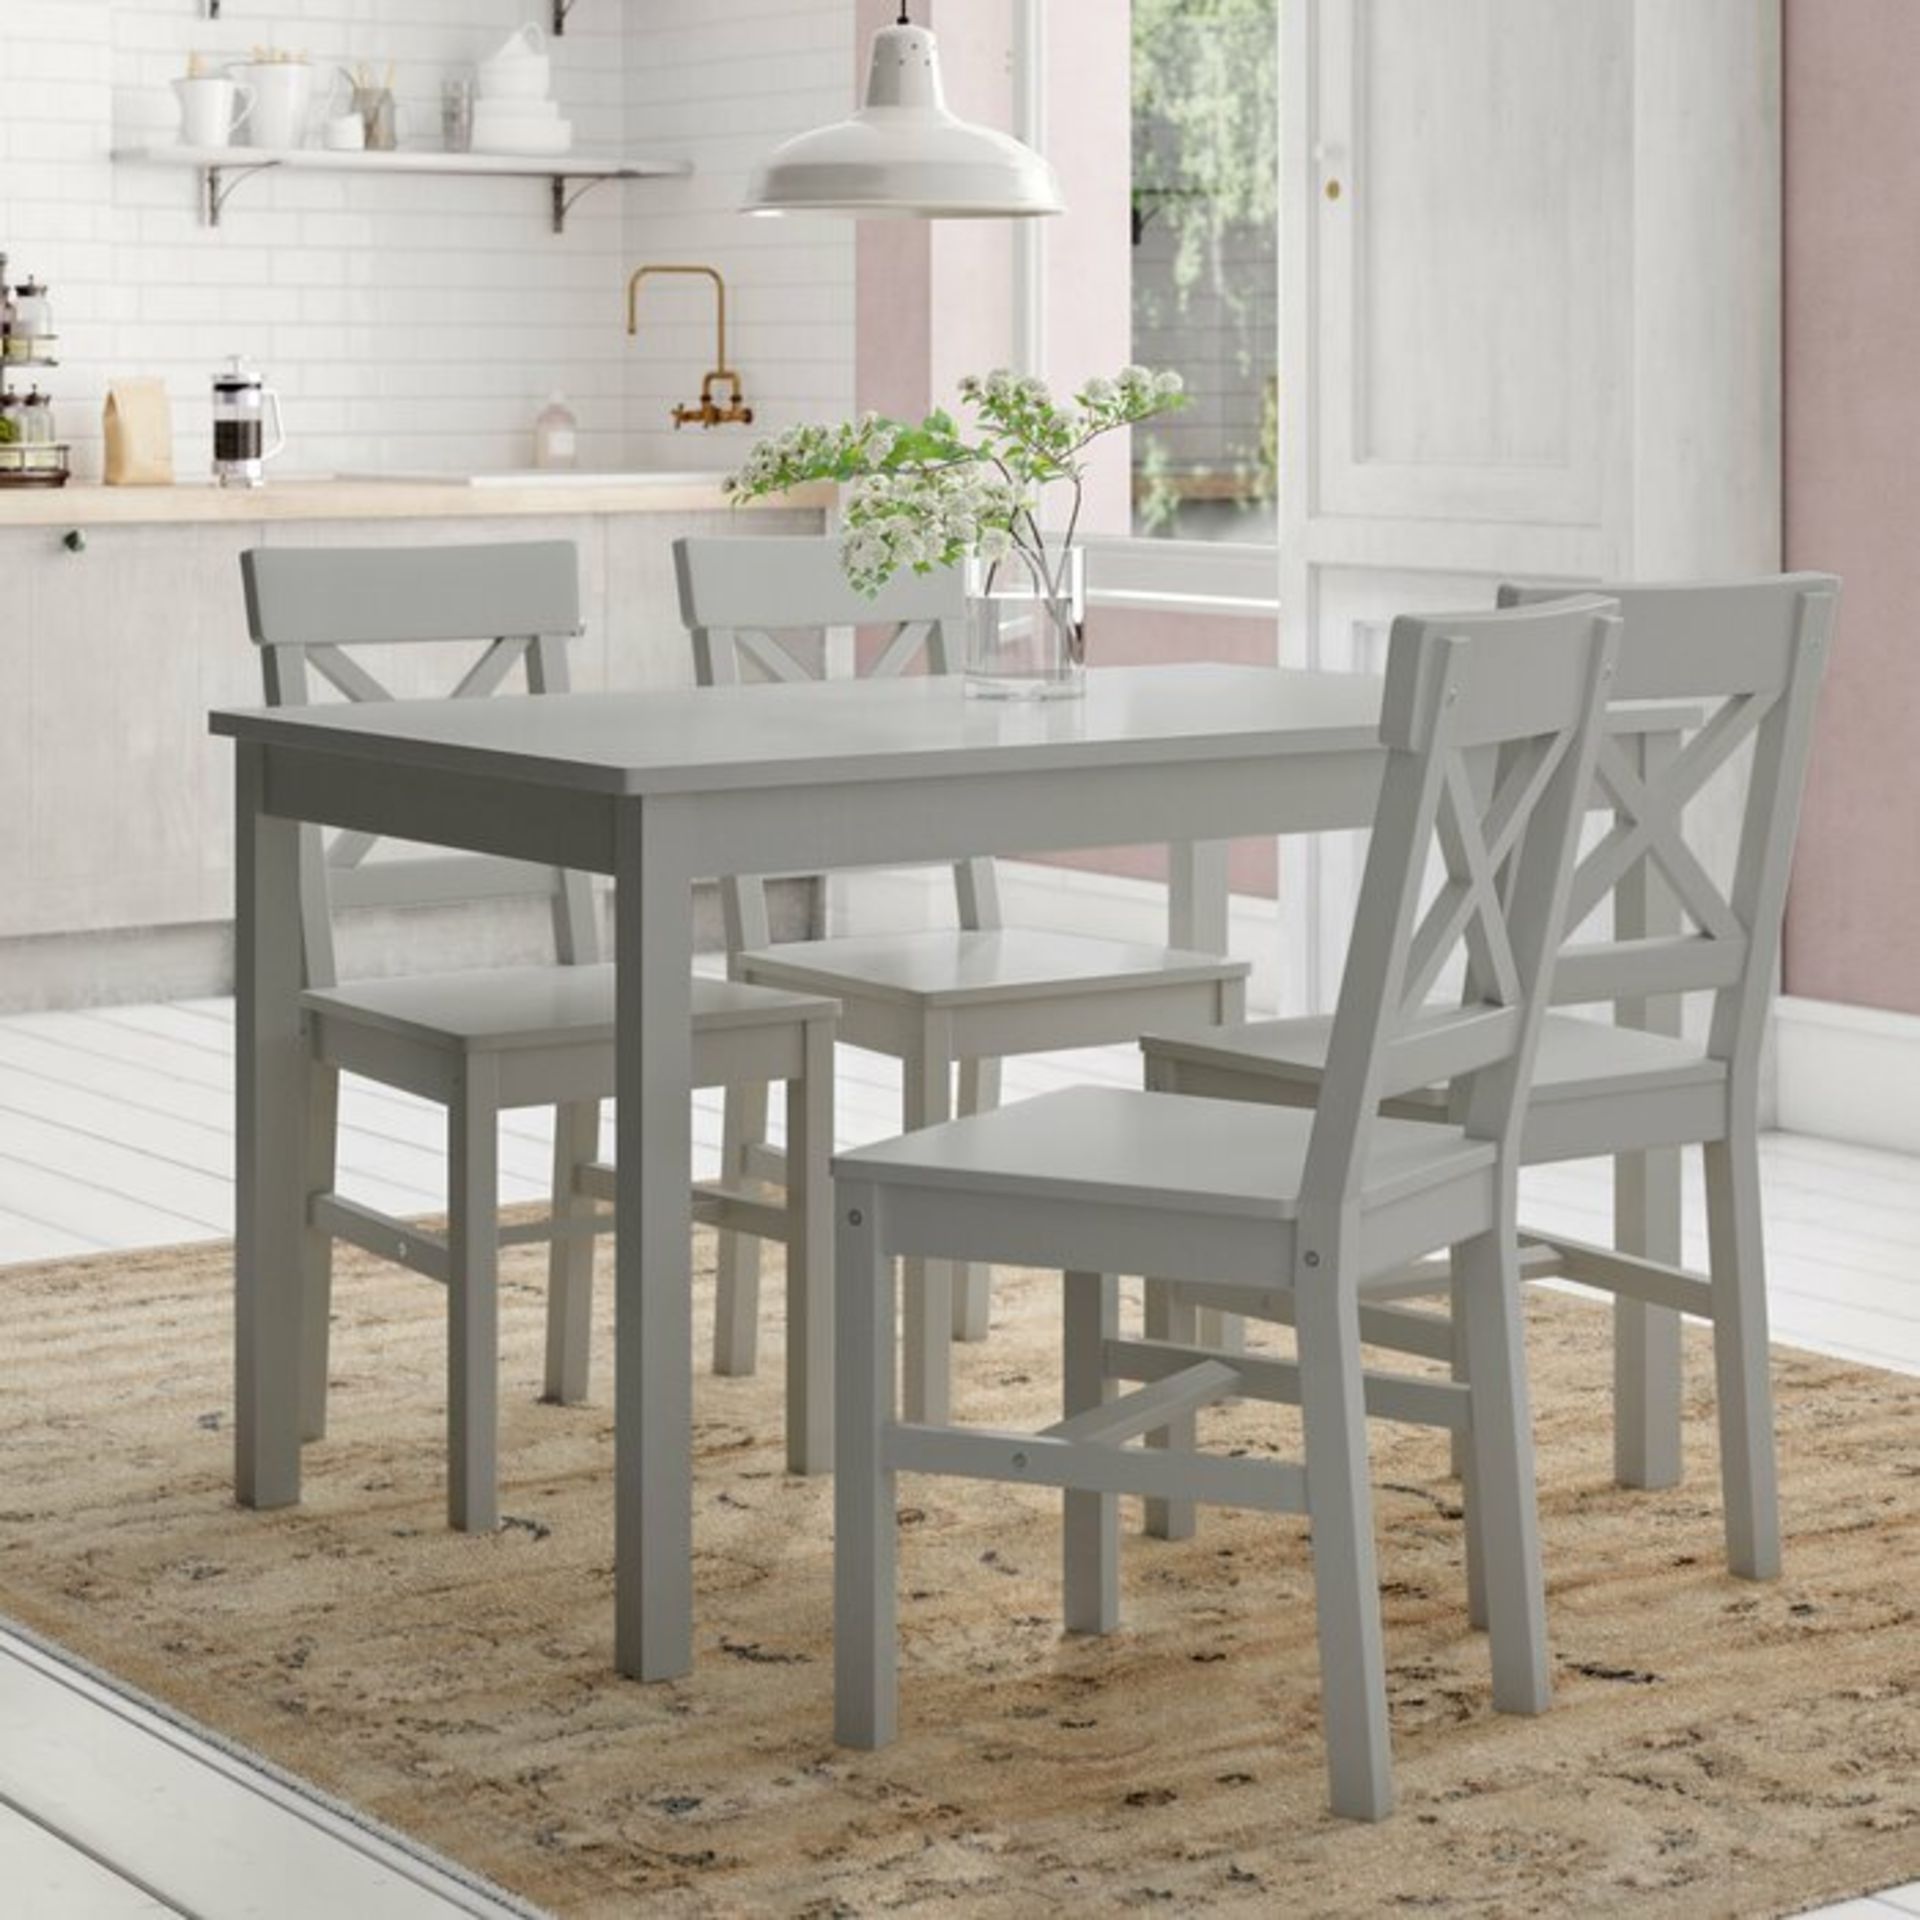 Lars Dining Set with 4 Chairs - RRP £309.99